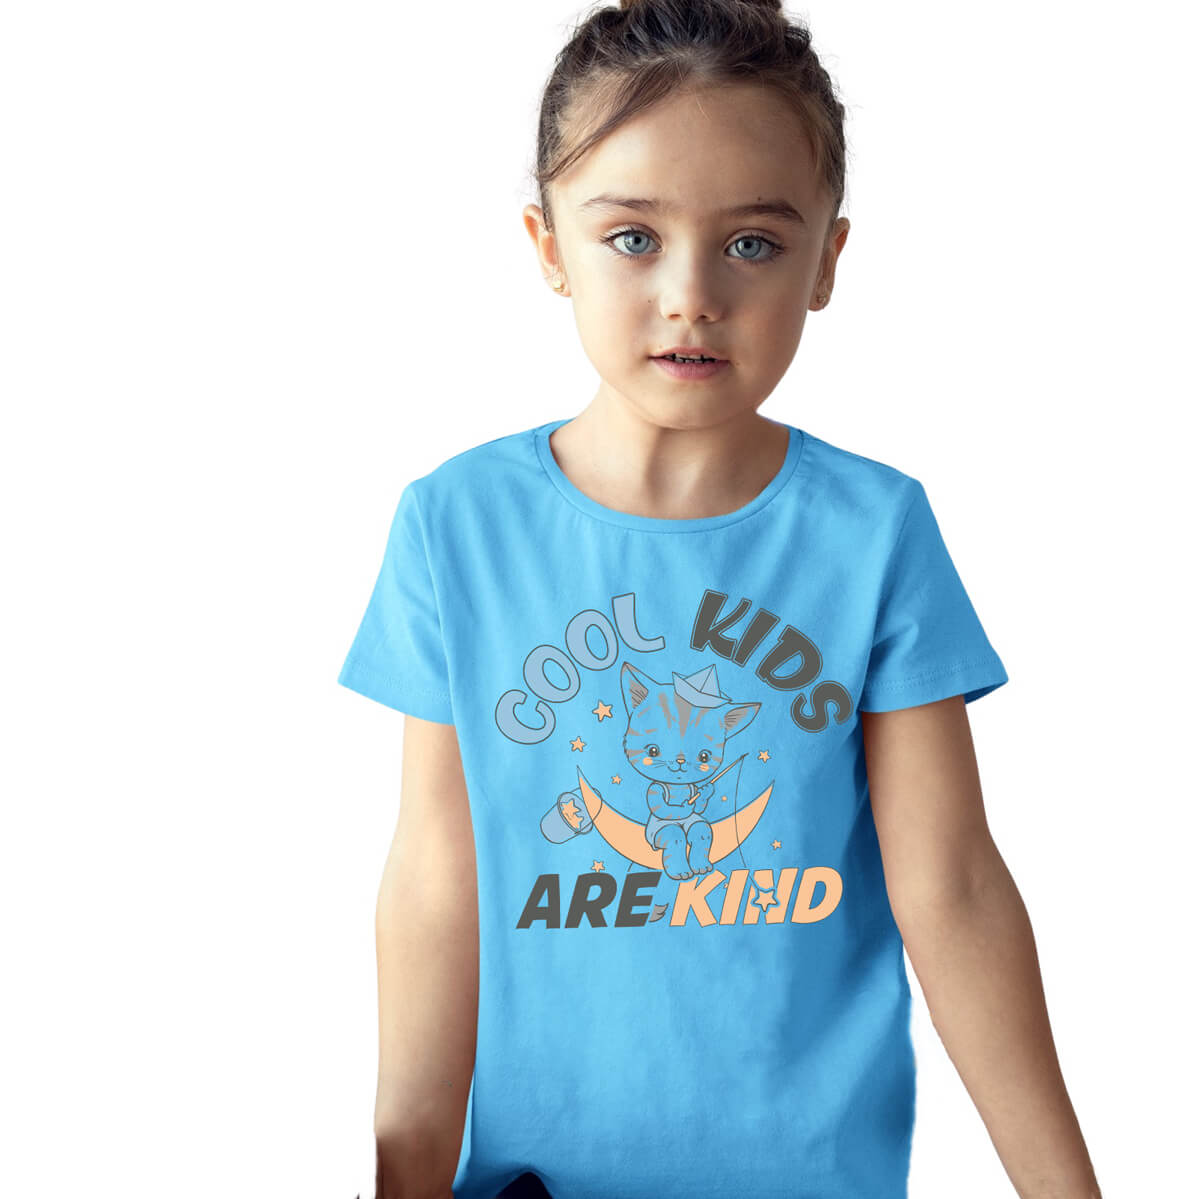 Cool Kids Are Kind Toddler T Shirt